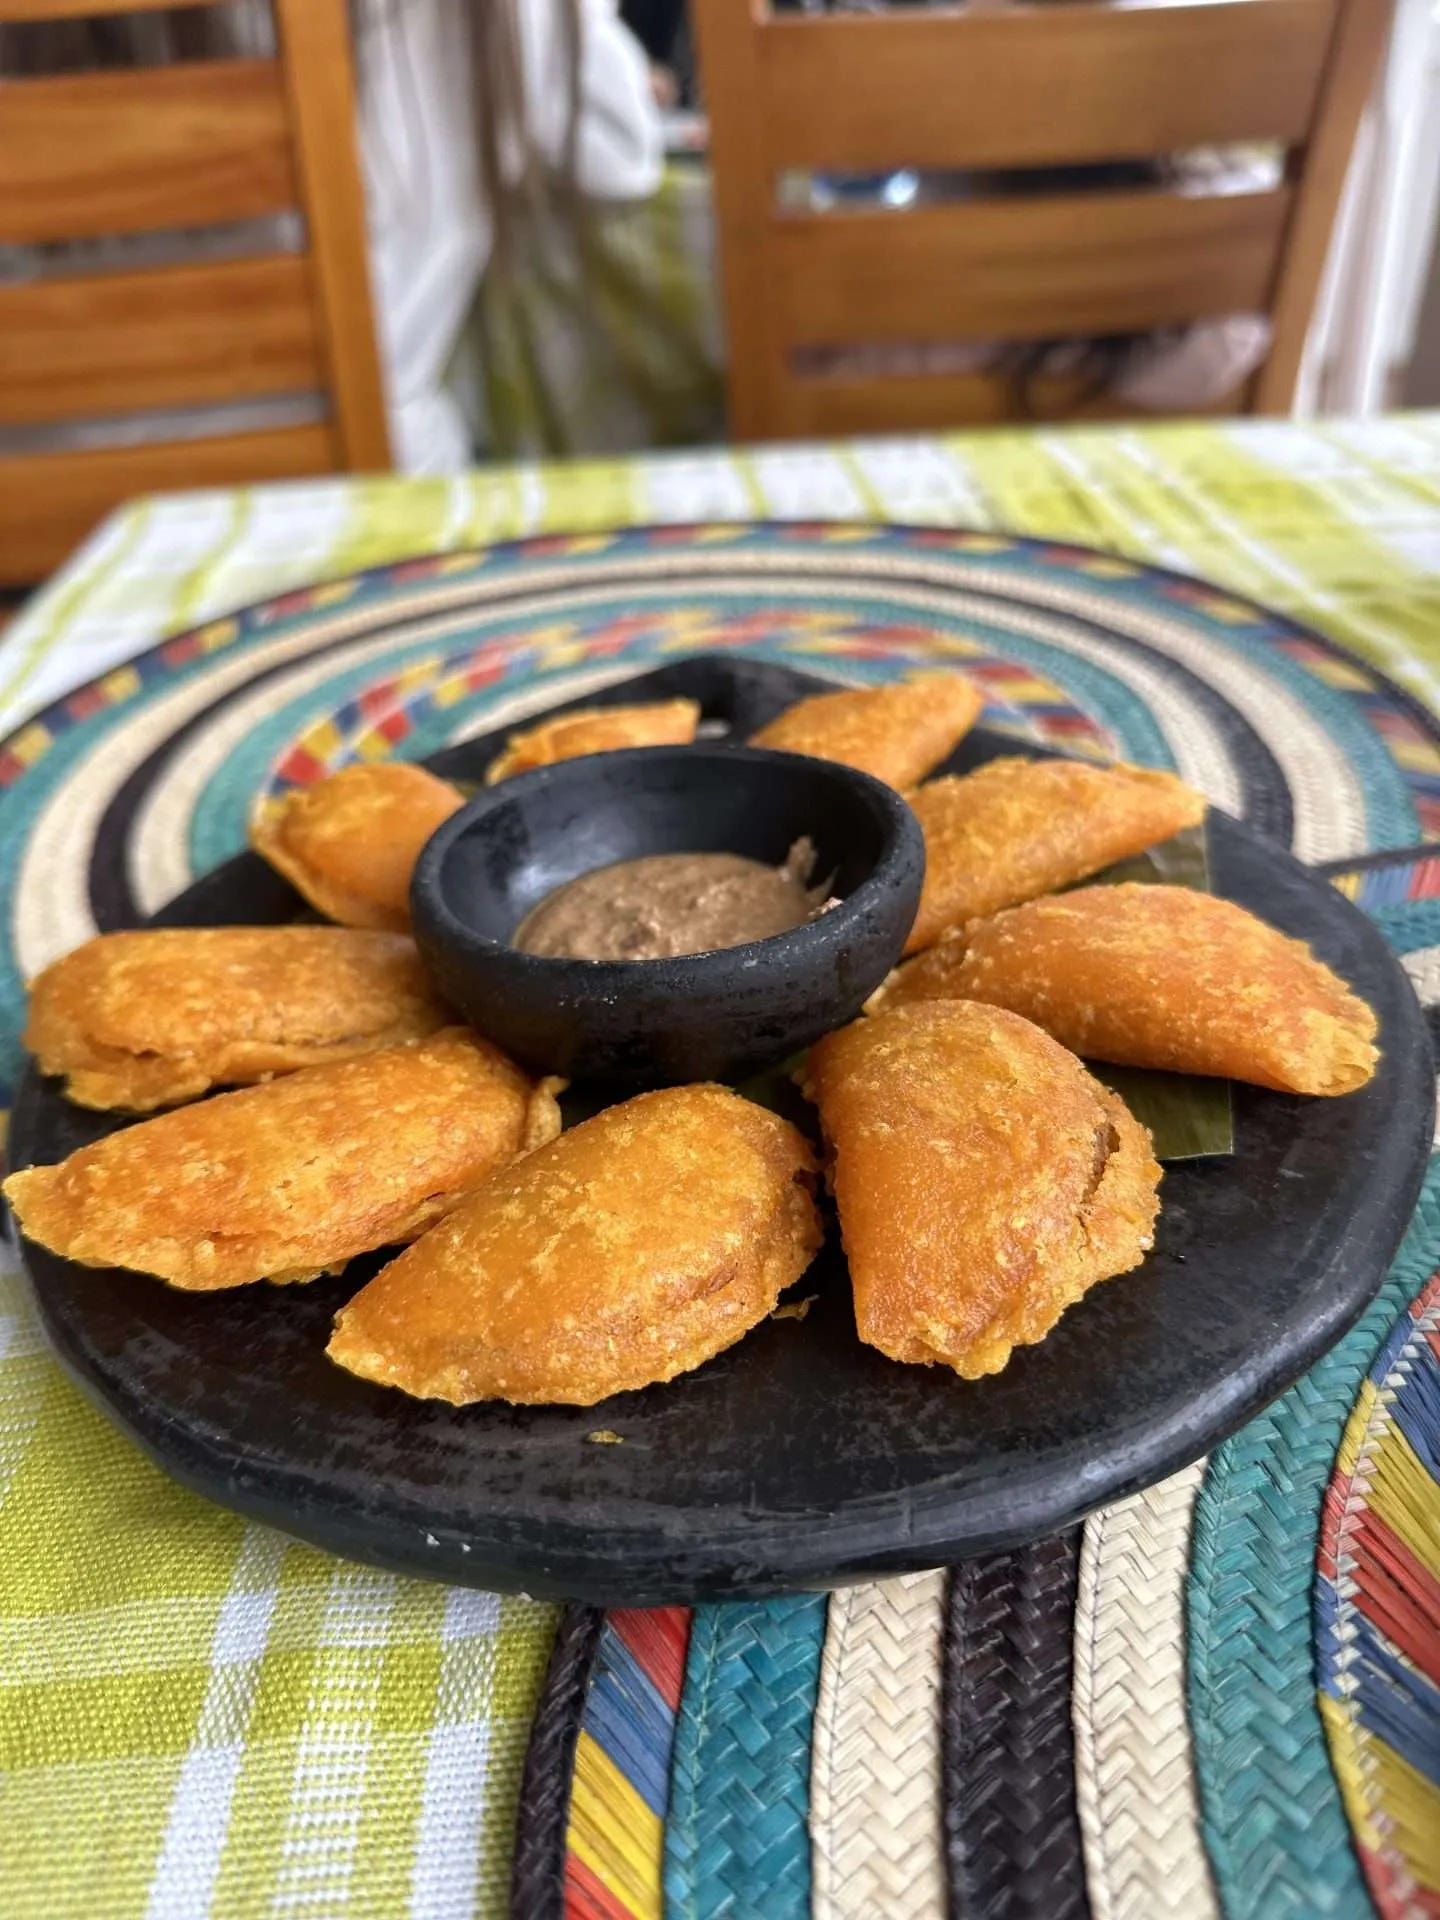 A plate of golden-brown empanadas arranged around a central dipping sauce, placed on a decorative woven mat and tablecloth—a perfect meal after pivoting during full-time travel. Wooden chairs are visible in the background.